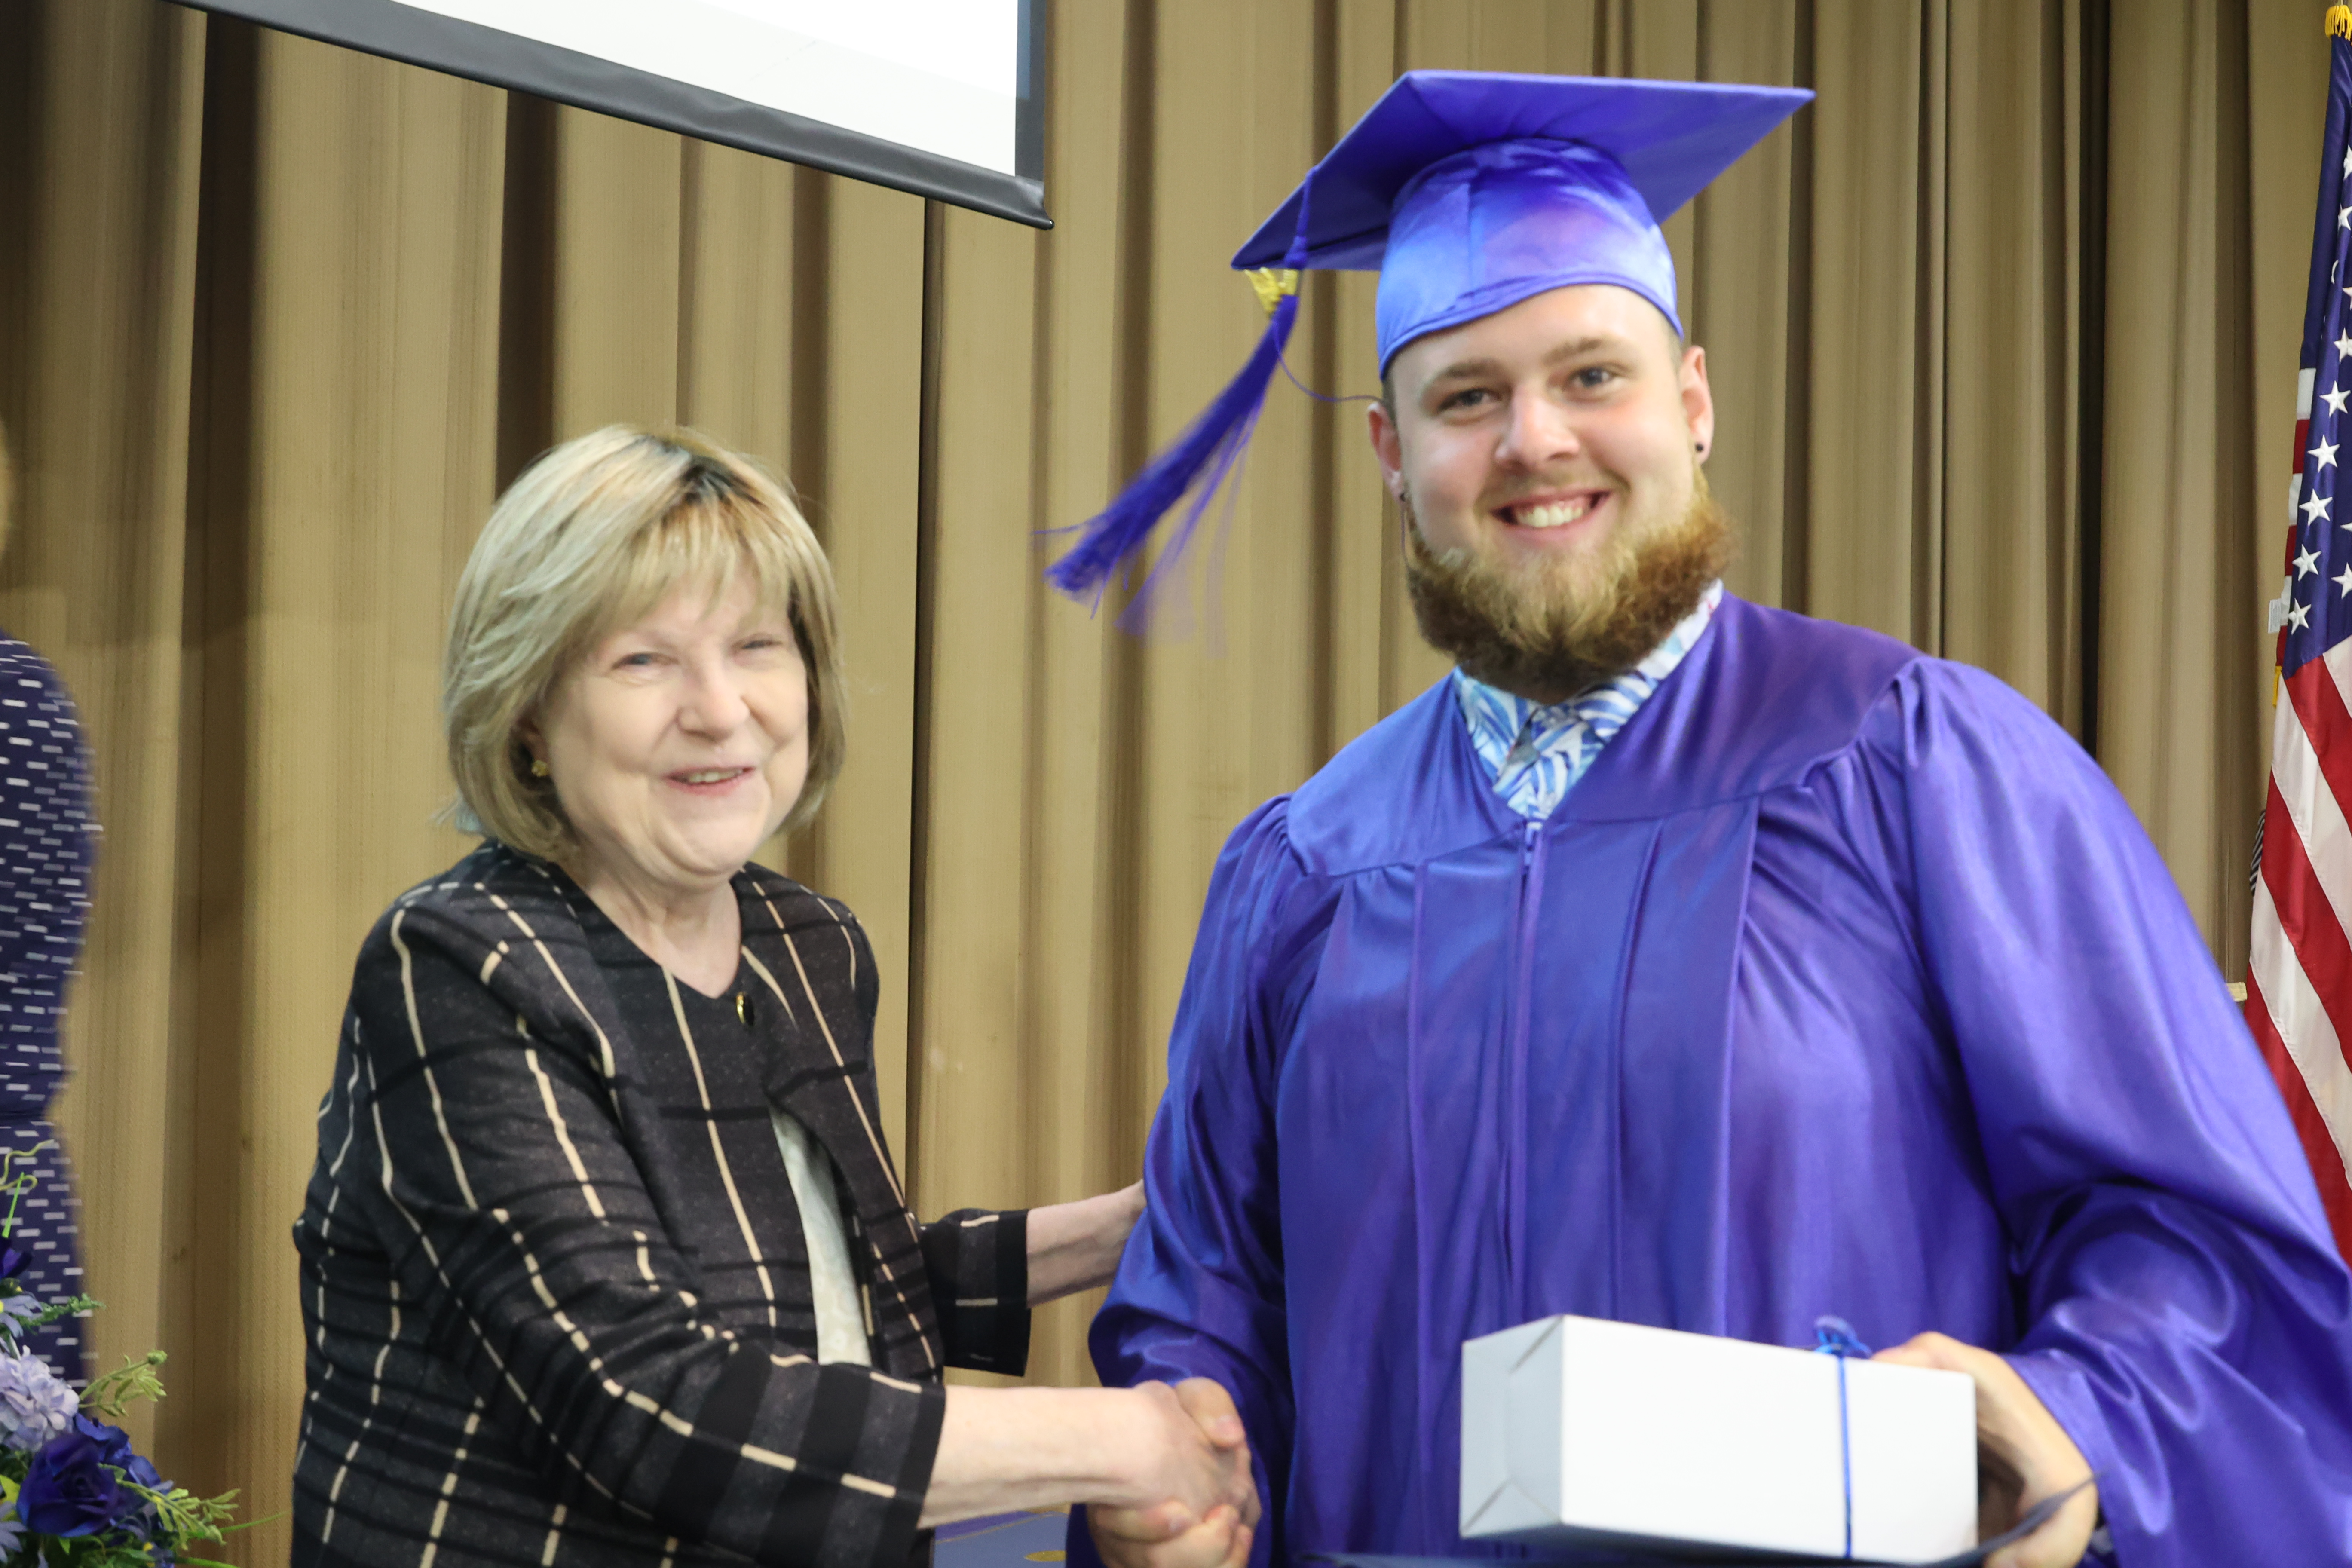 A White male student dressed in a blue cap and gown shakes the ASPIRE coordinators hand after receiving a gift.